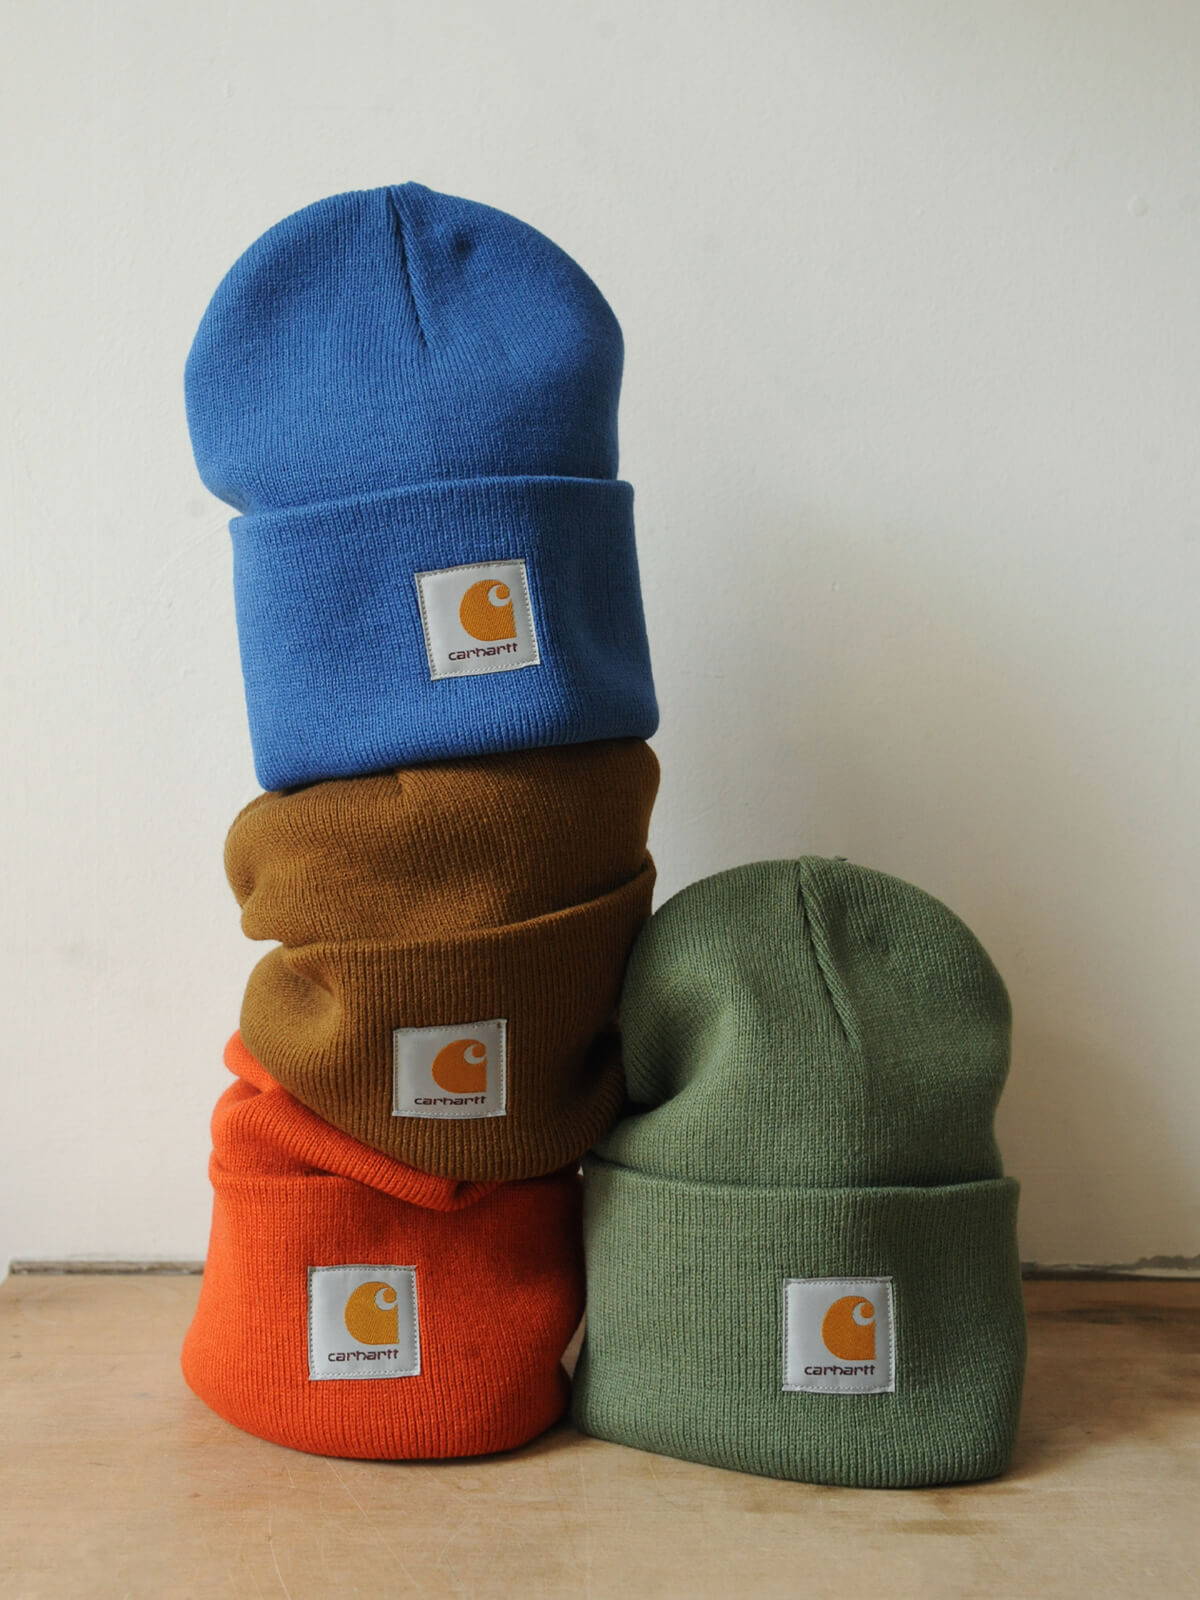 A styled image of Carhartt hats.